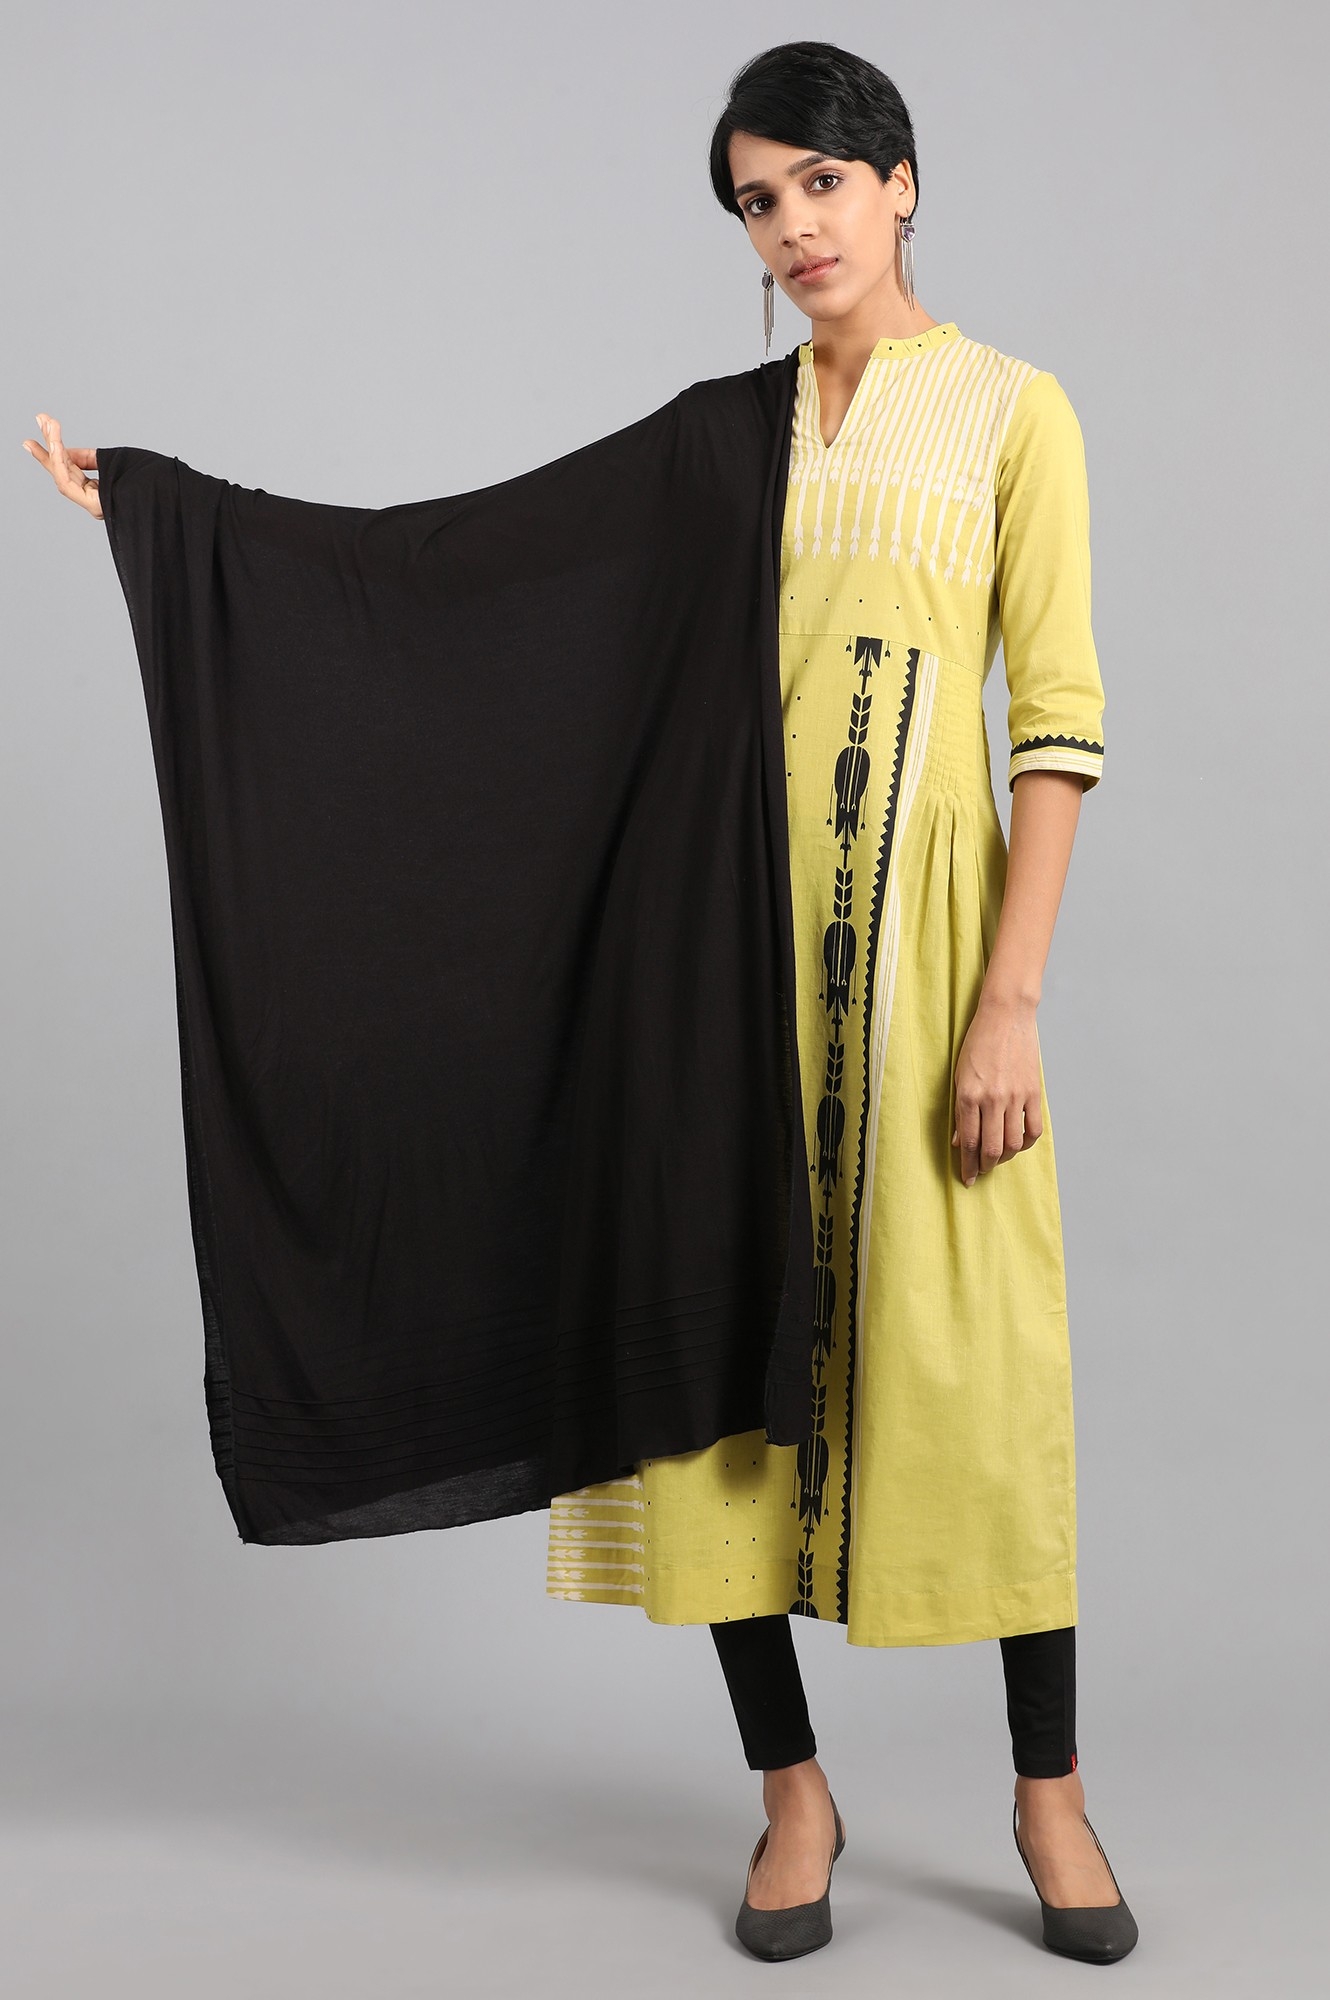 W | W You Can Pair The Dupatta With Your Casual Kurta And Pants Or Can Also Style It With Your Western Top And Jeans.